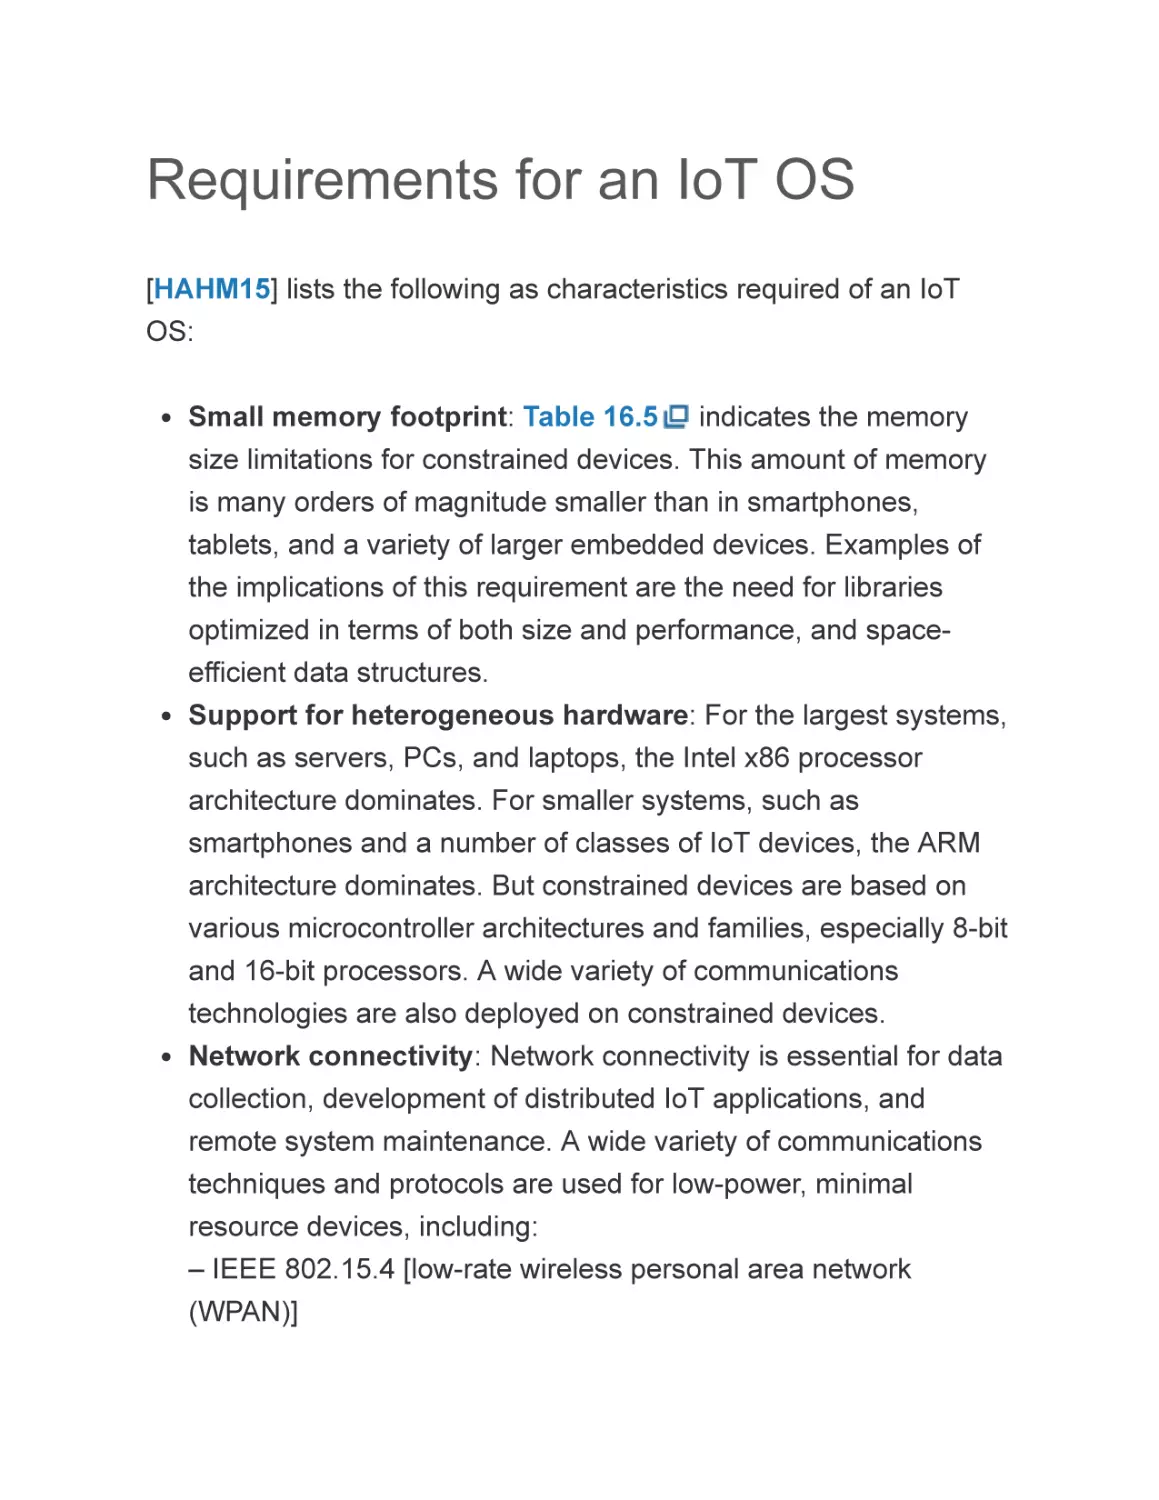 Requirements for an IoT OS